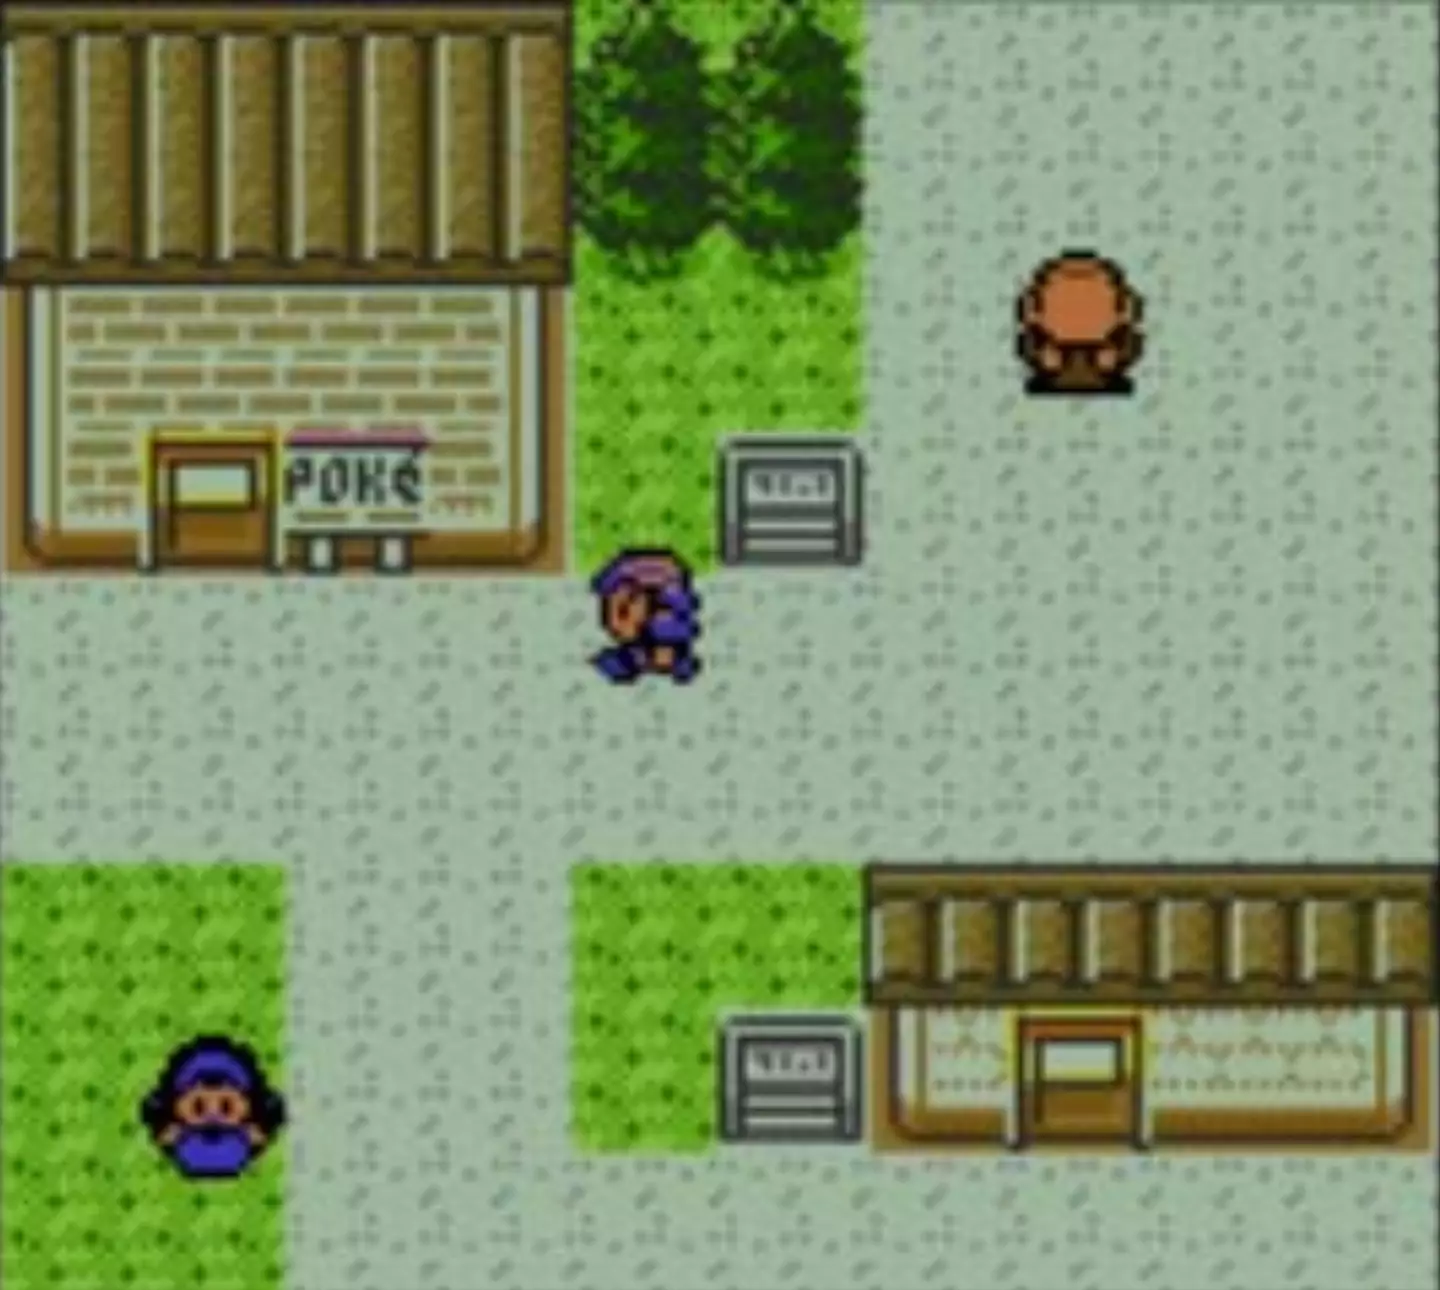 Pokémon Crystal was the first game in the series to have a playable female character. /